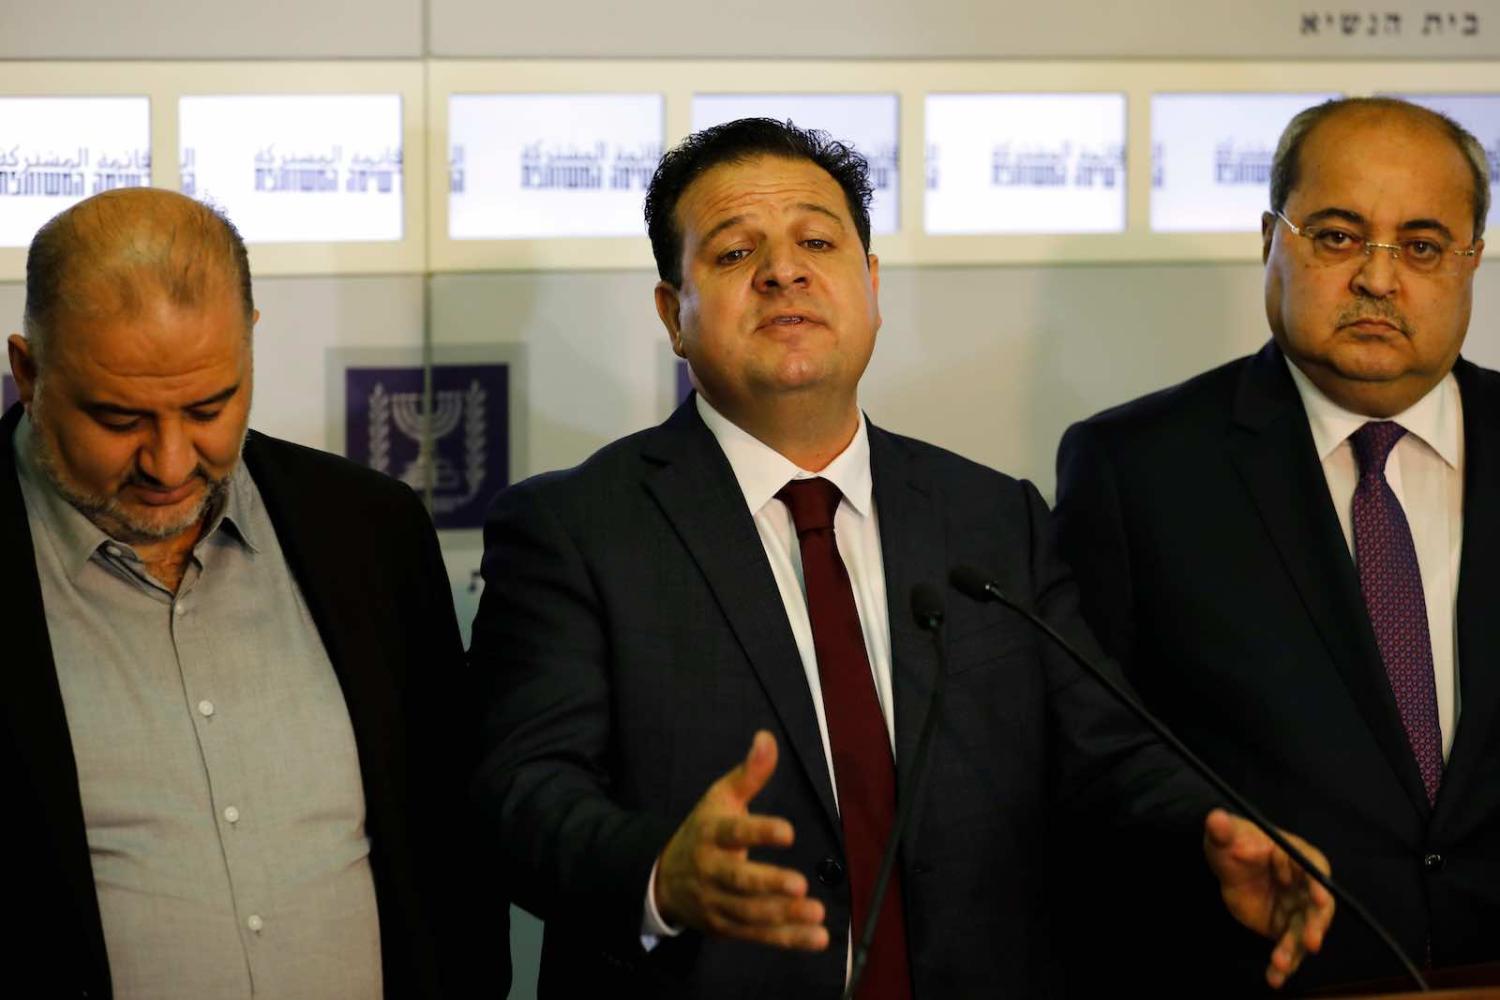 Ayman Odeh (centre) with members of the Joint Arab List (Photo: Menahem Kahana/AFP/Getty Images)